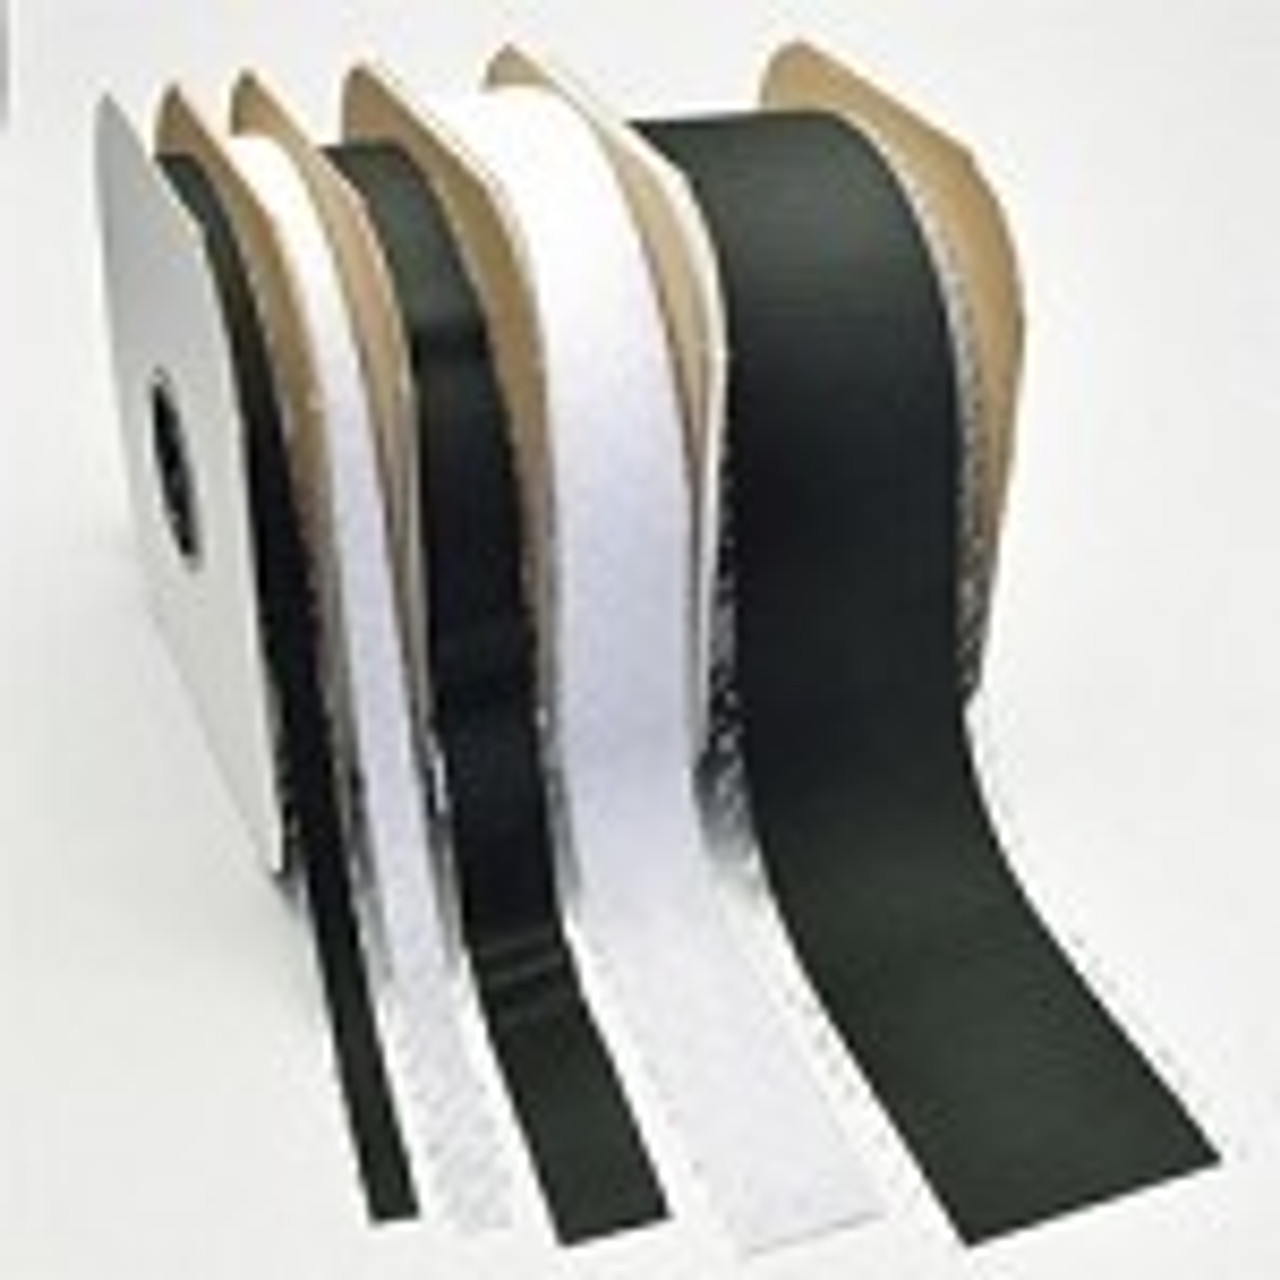 VELCRO® Brand Hook or Loop For High Temps 1